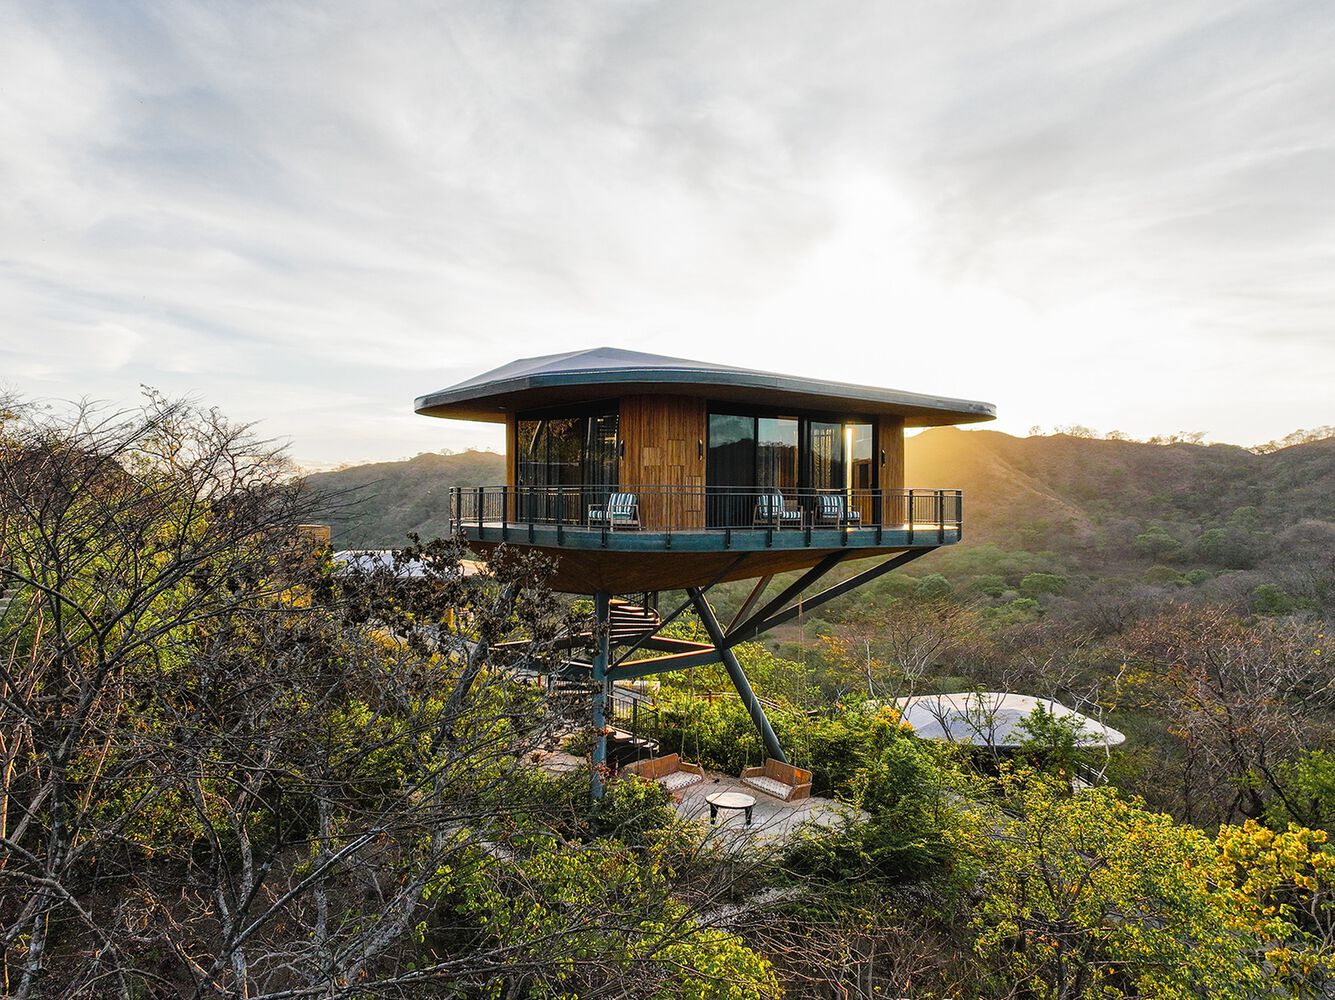 Suitree Experience Hotel: Where Architecture and Nature Coexist in Harmony